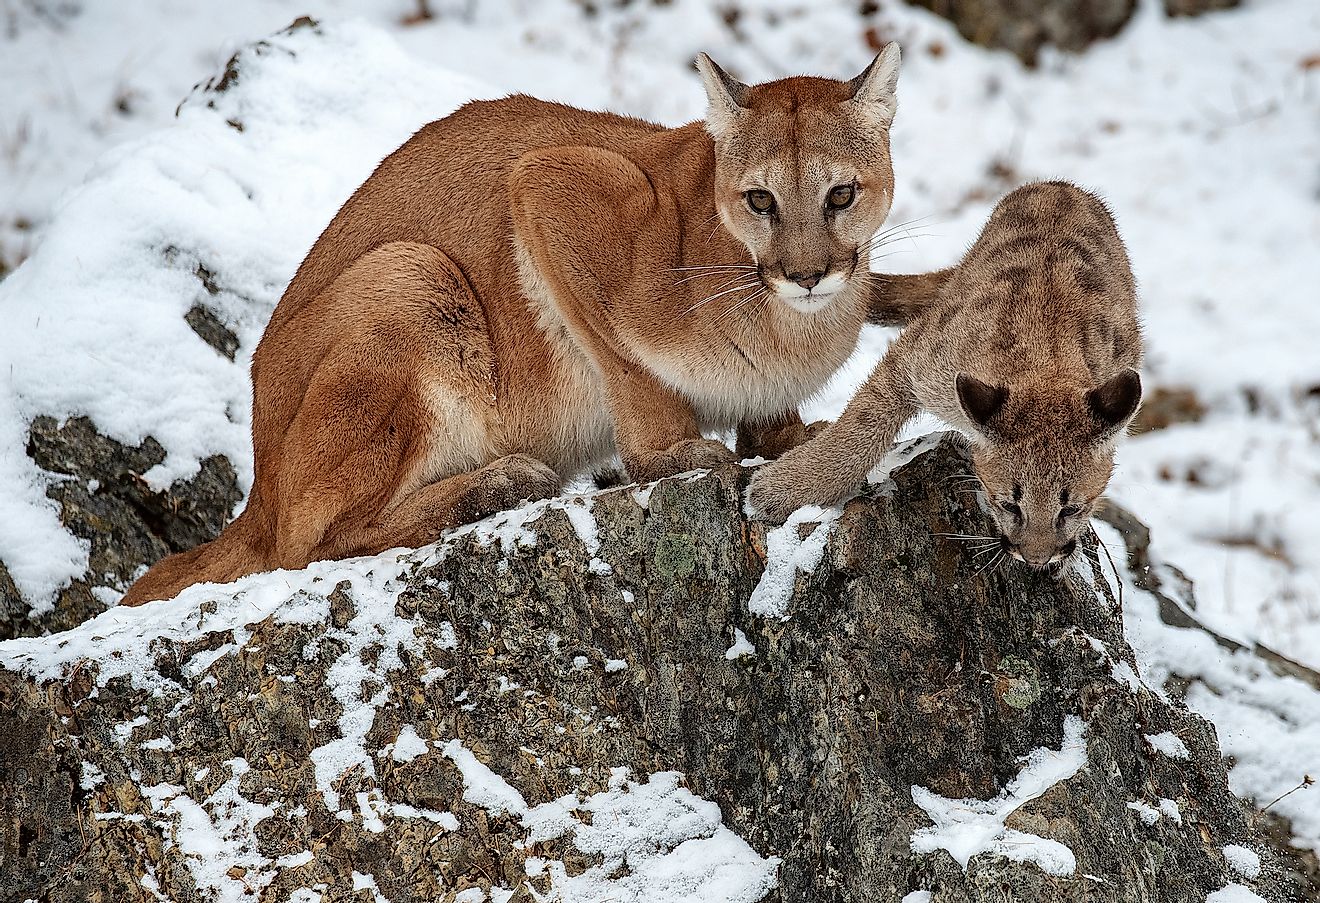 A mountain lion with cub.